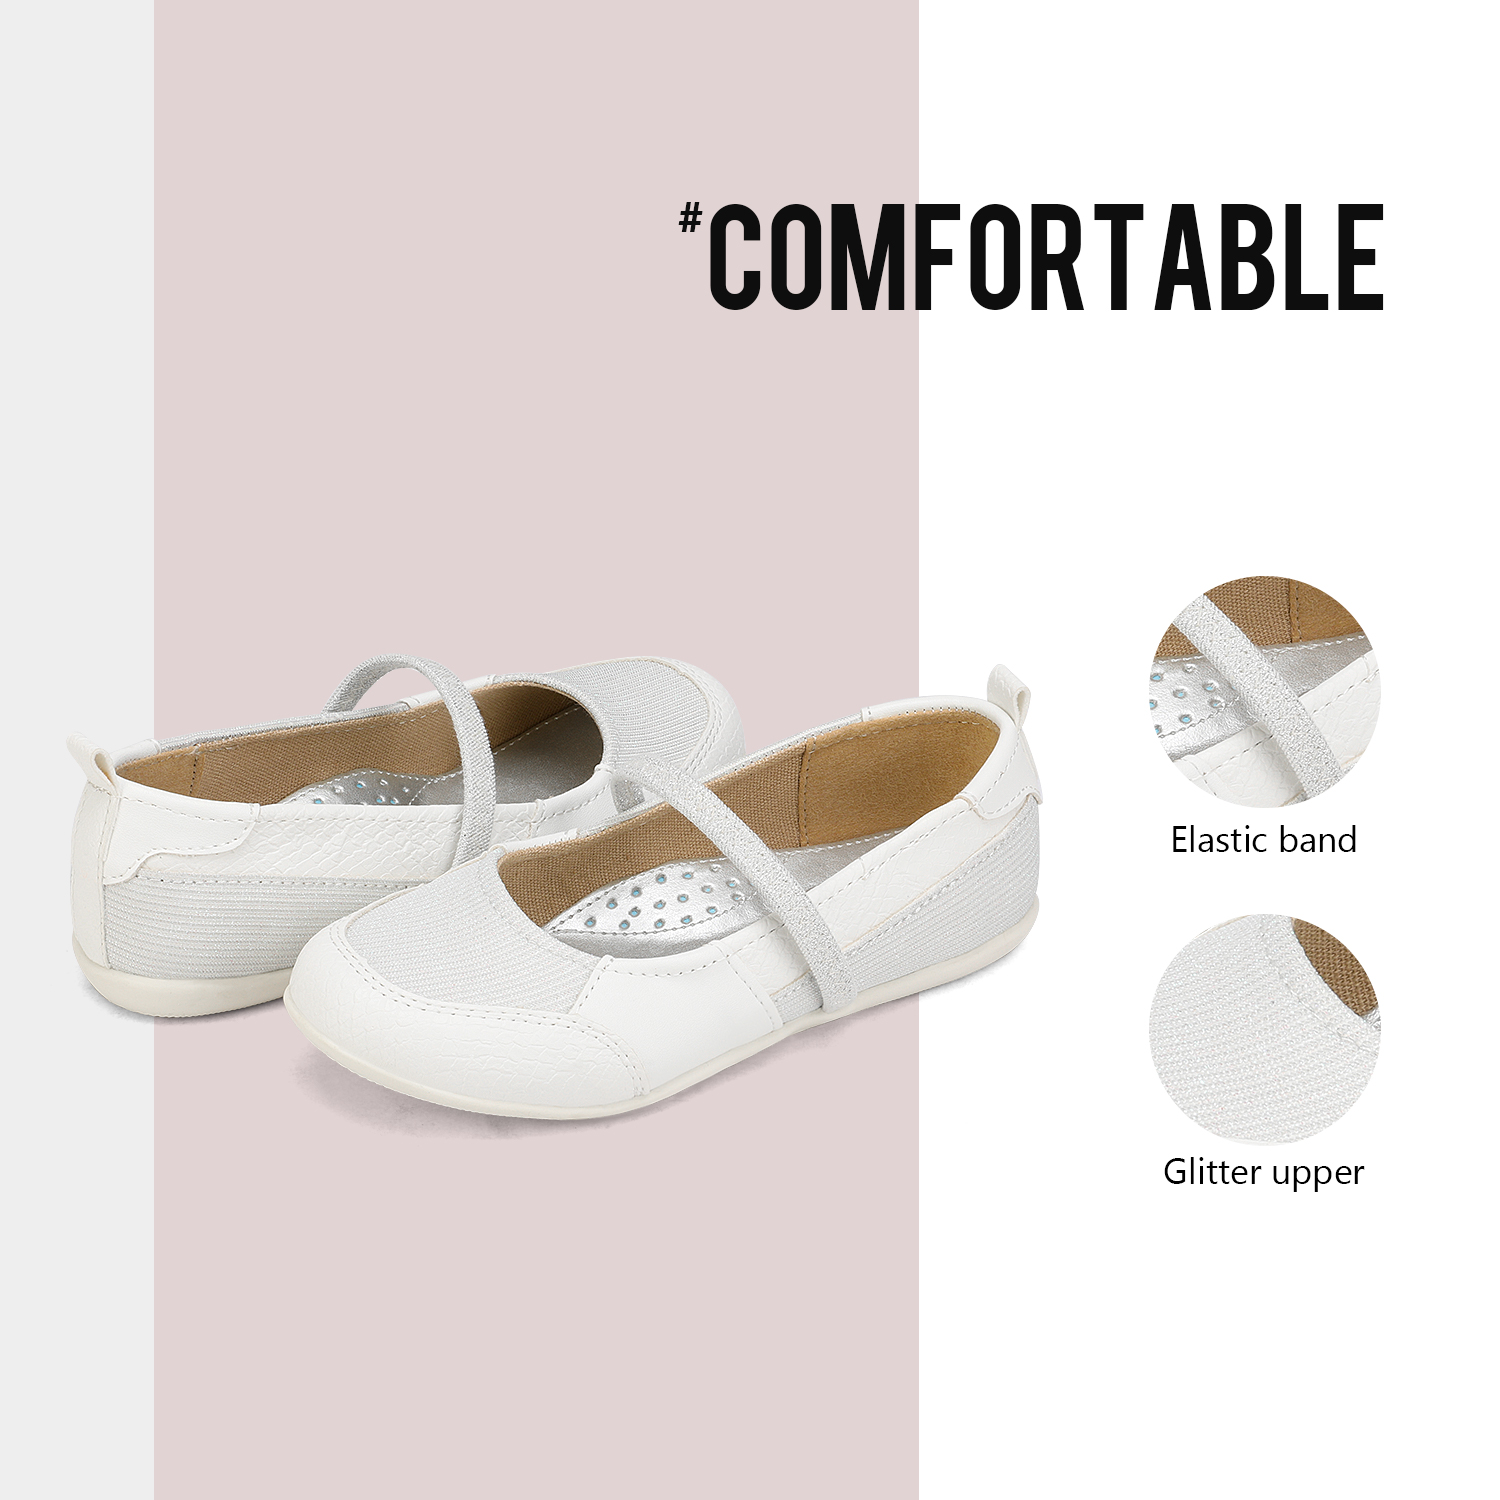 Dream Pairs Girls Mary Jane Flats Shoes Comfort School Casual Shoes Slip On Flat Shoes For Kids SASA-2 WHITE Size 10 - image 3 of 5